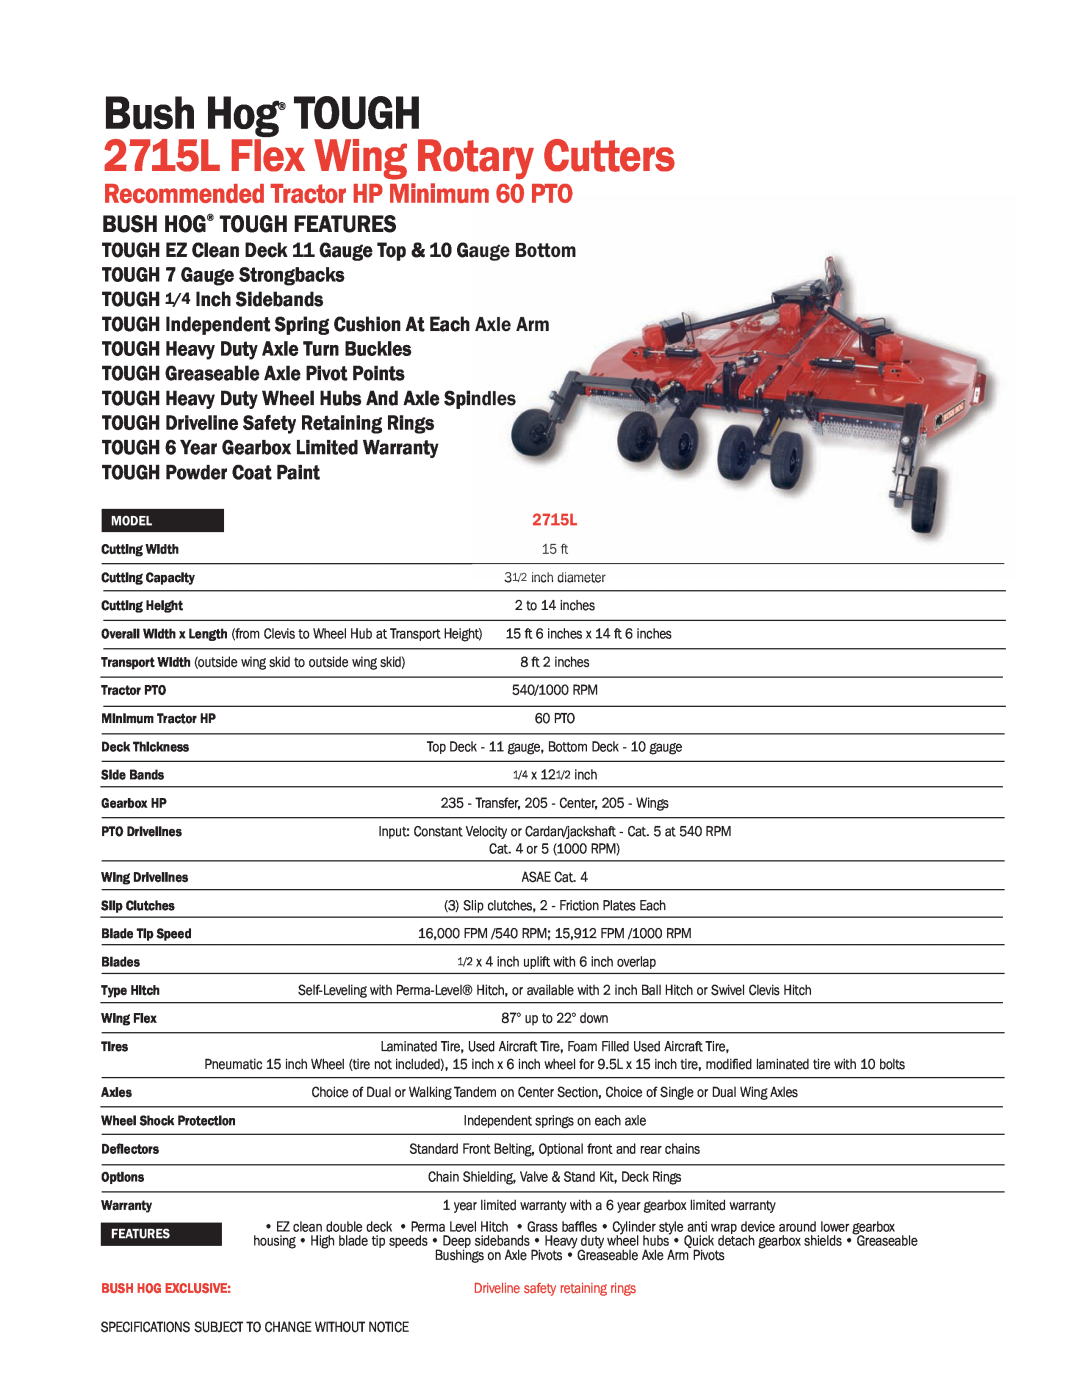 Bush Hog specifications Bush Hog TOUGH, 2715L Flex Wing Rotary Cutters, Recommended Tractor HP Minimum 60 PTO 